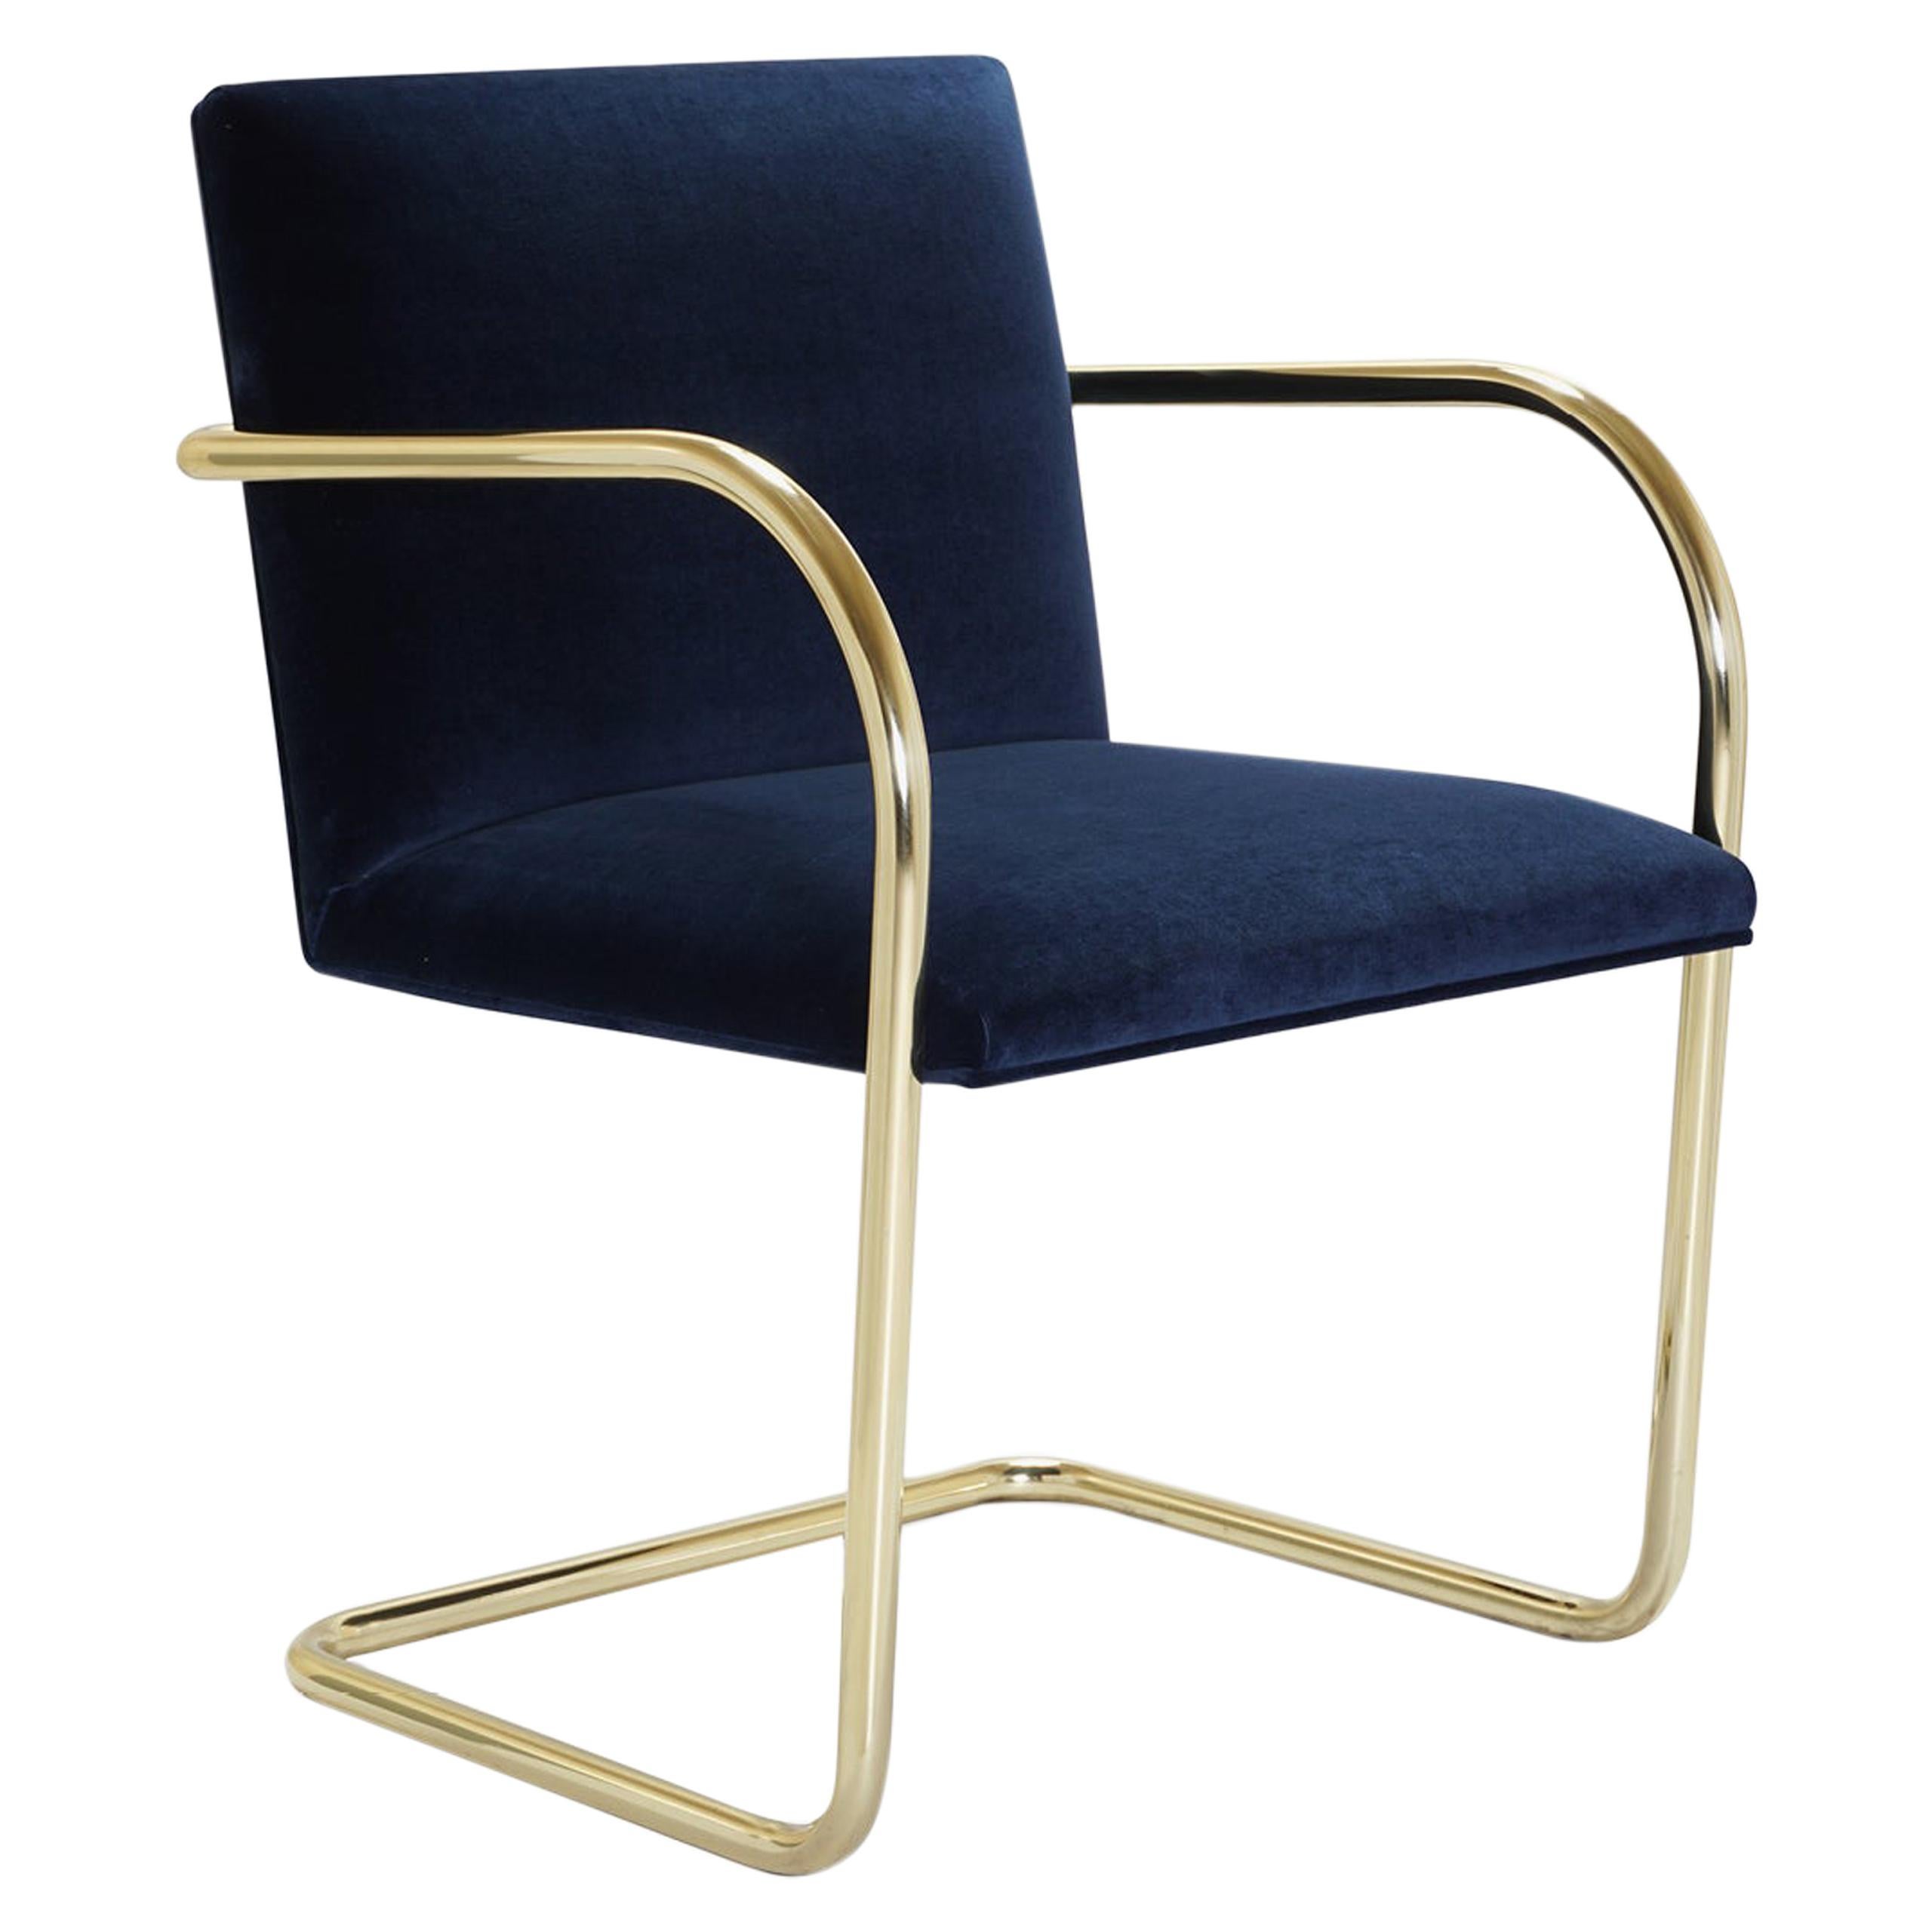 Brno Tubular Chairs in Navy Velvet Polished Brass by Mies Van Der Rohe for Knoll